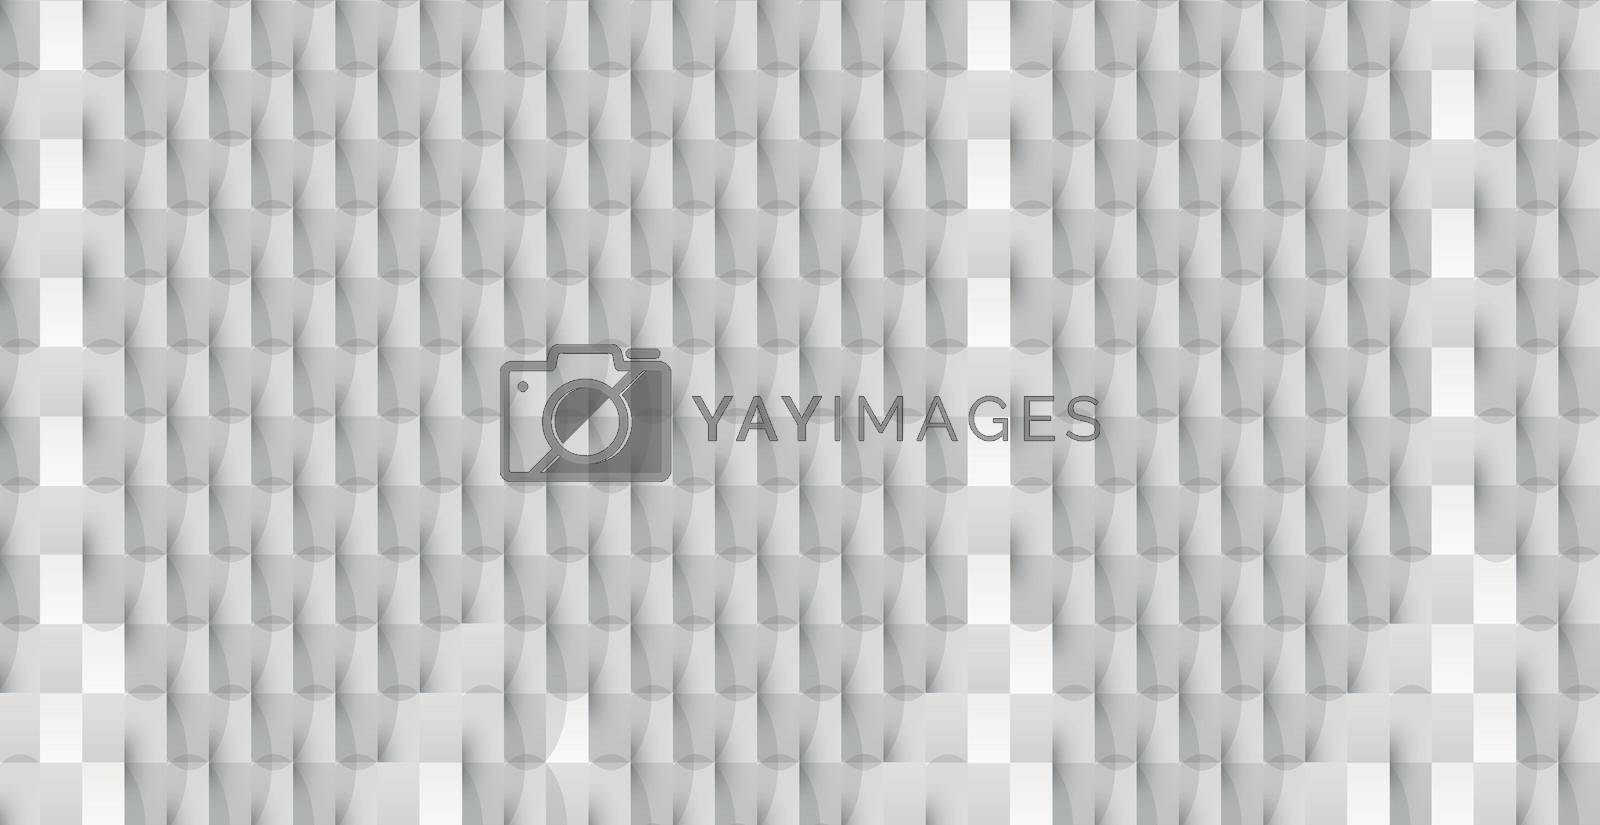 Royalty free image of Abstract background white - gray rectangles - Vector by BEMPhoto